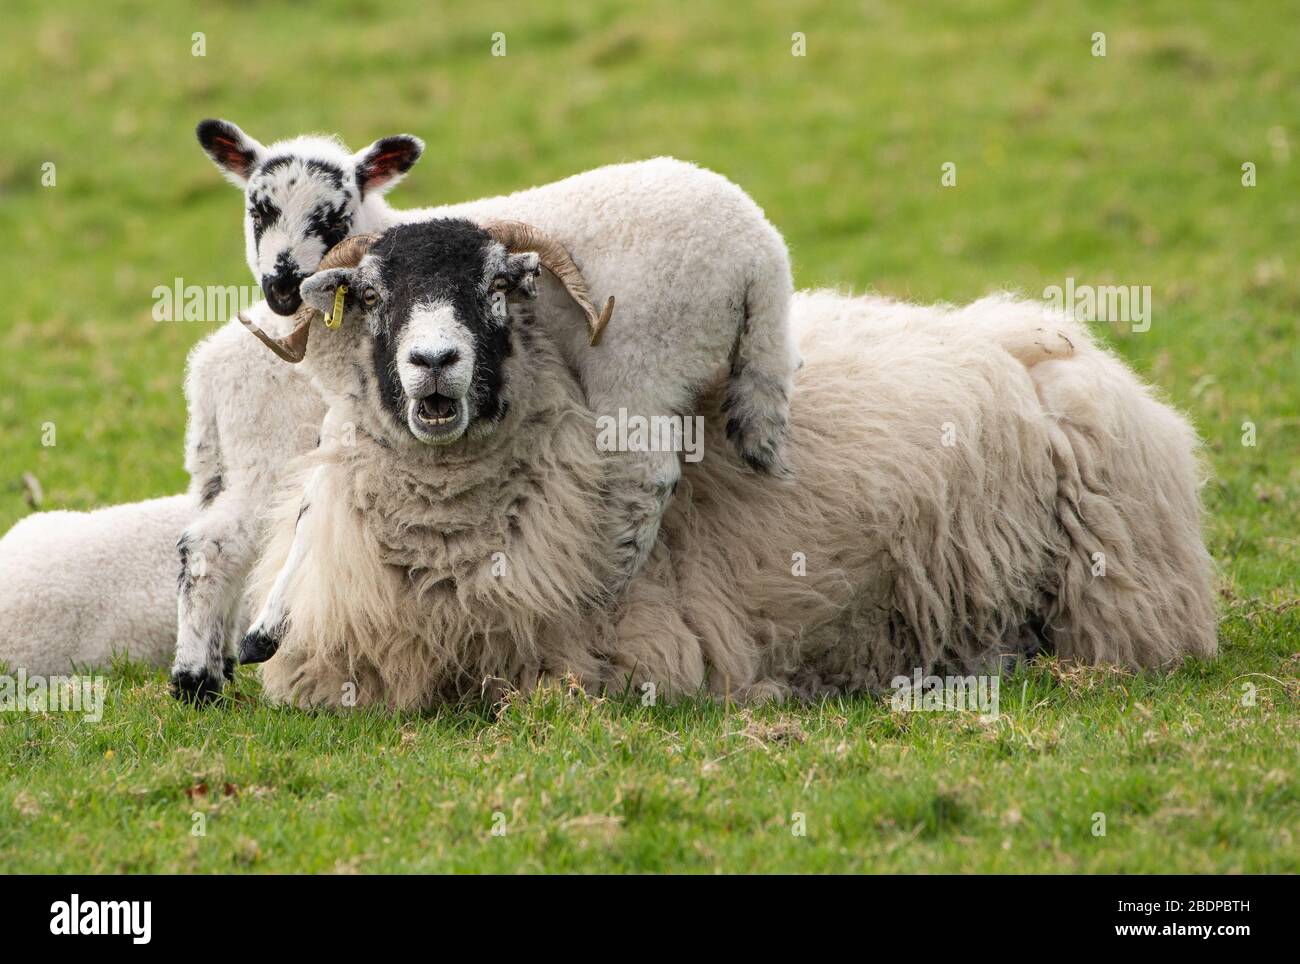 Preston, Lancashire, UK. 9th Apr, 2020. A patient Swaledale ewe allows her playful lambs to use her for climbing entertainment, Chipping, Preston, Lancashire, England, United Kingdom. The recent good weather has improved conditions for lambing so far this year. Credit: John Eveson/Alamy Live News Stock Photo